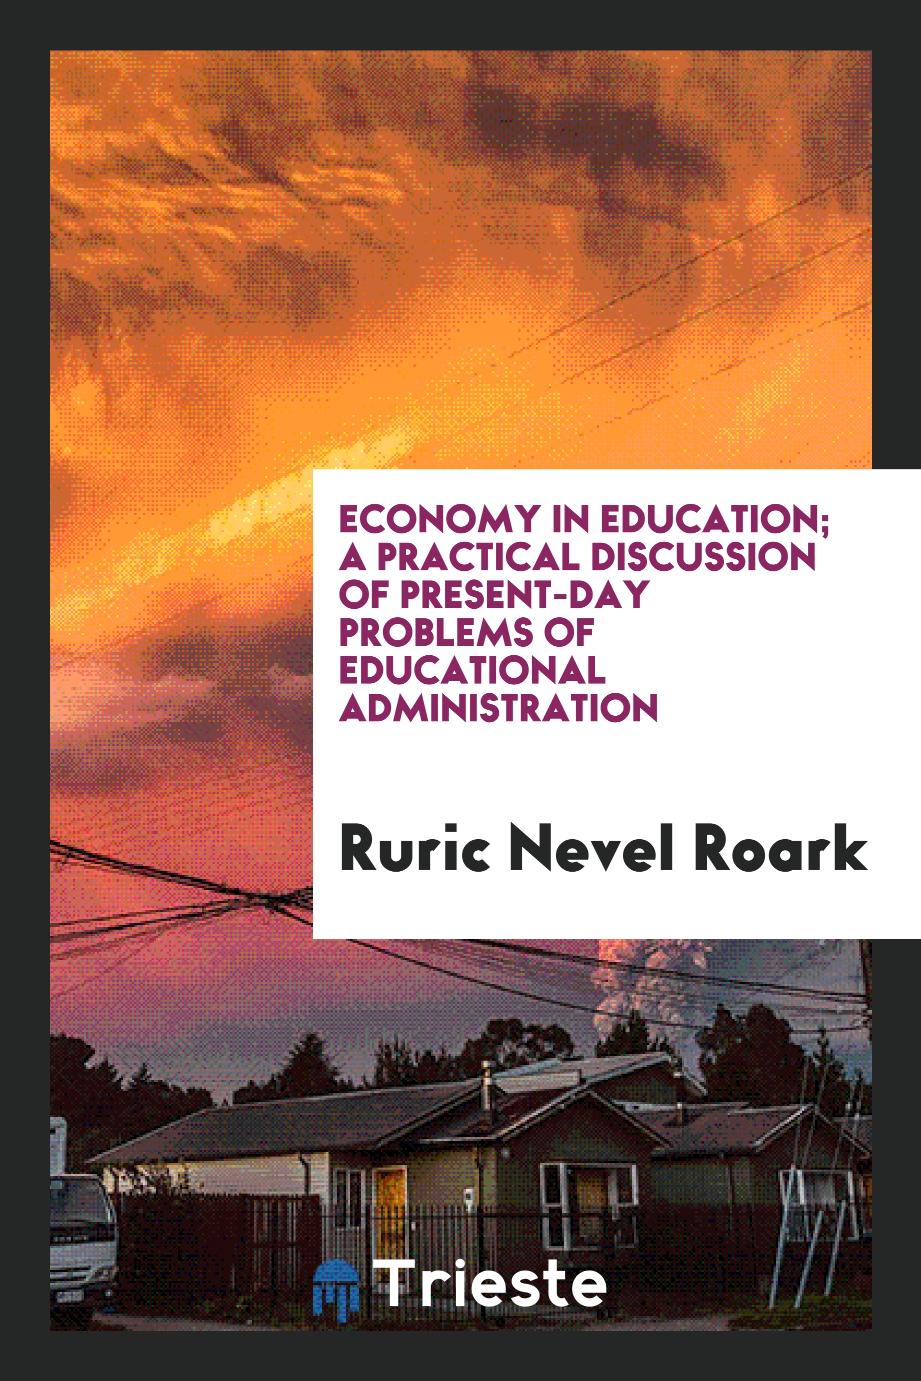 Economy in education; a practical discussion of present-day problems of educational administration